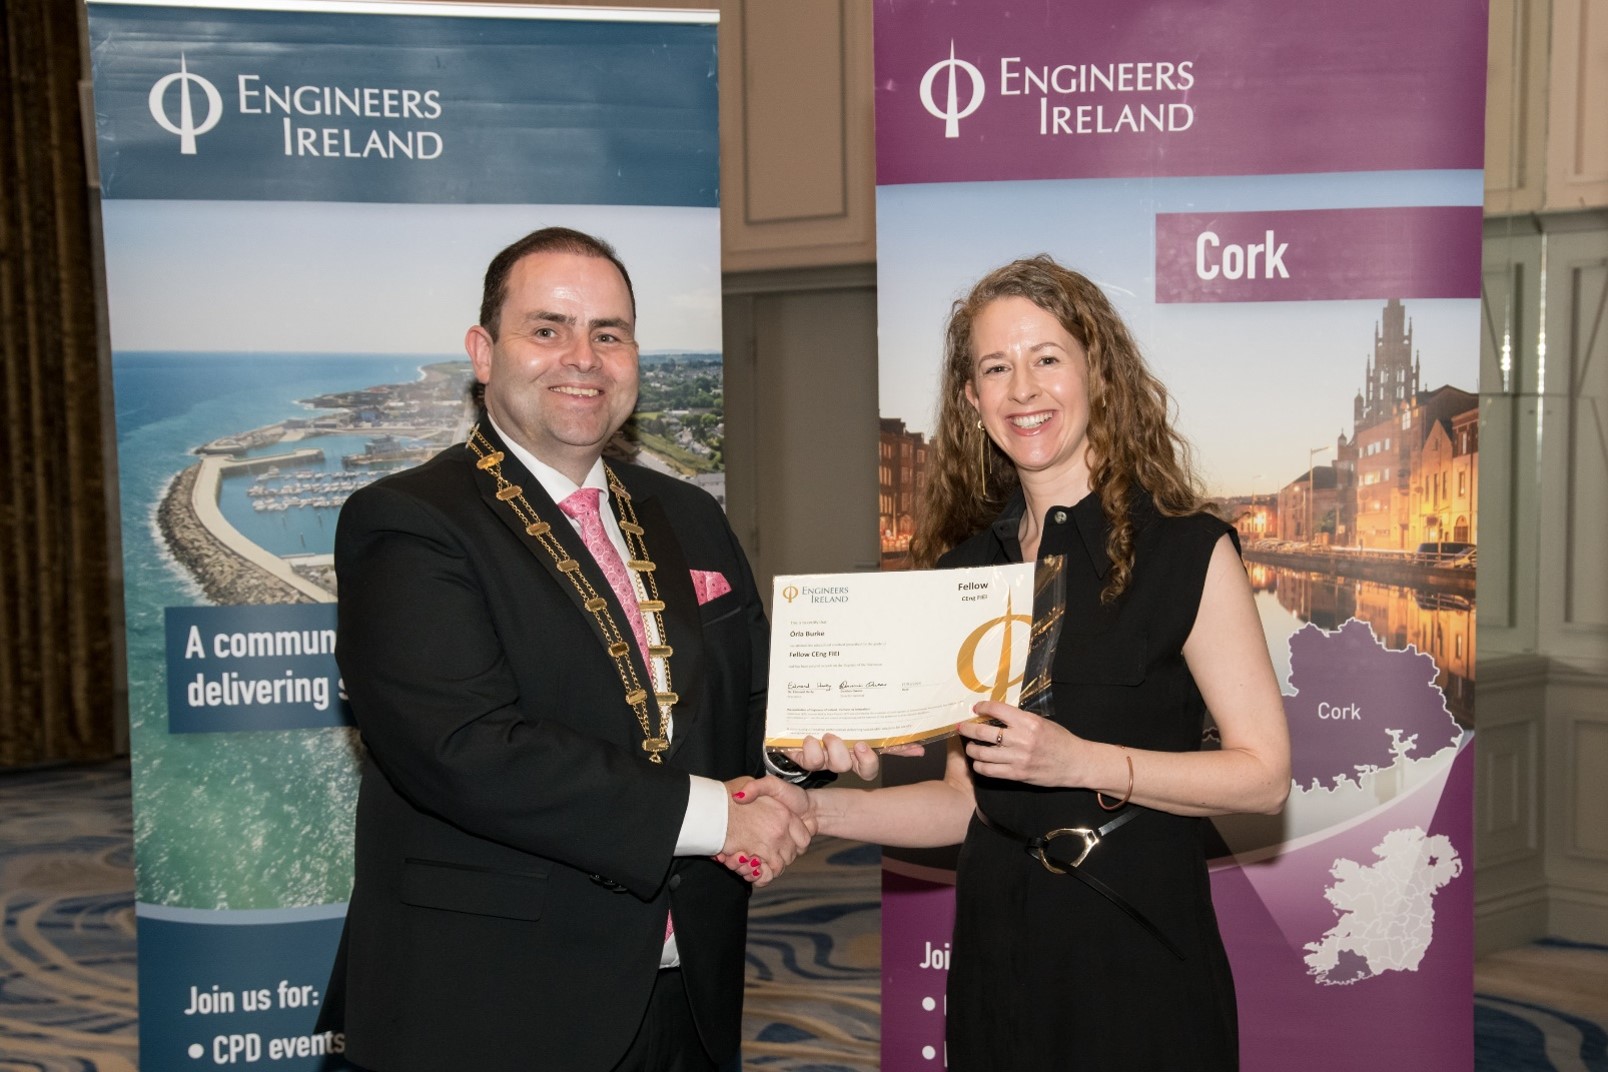 Órla Burke being awarded the title of Fellow by Engineers Ireland president Dr. Edmond Harty
